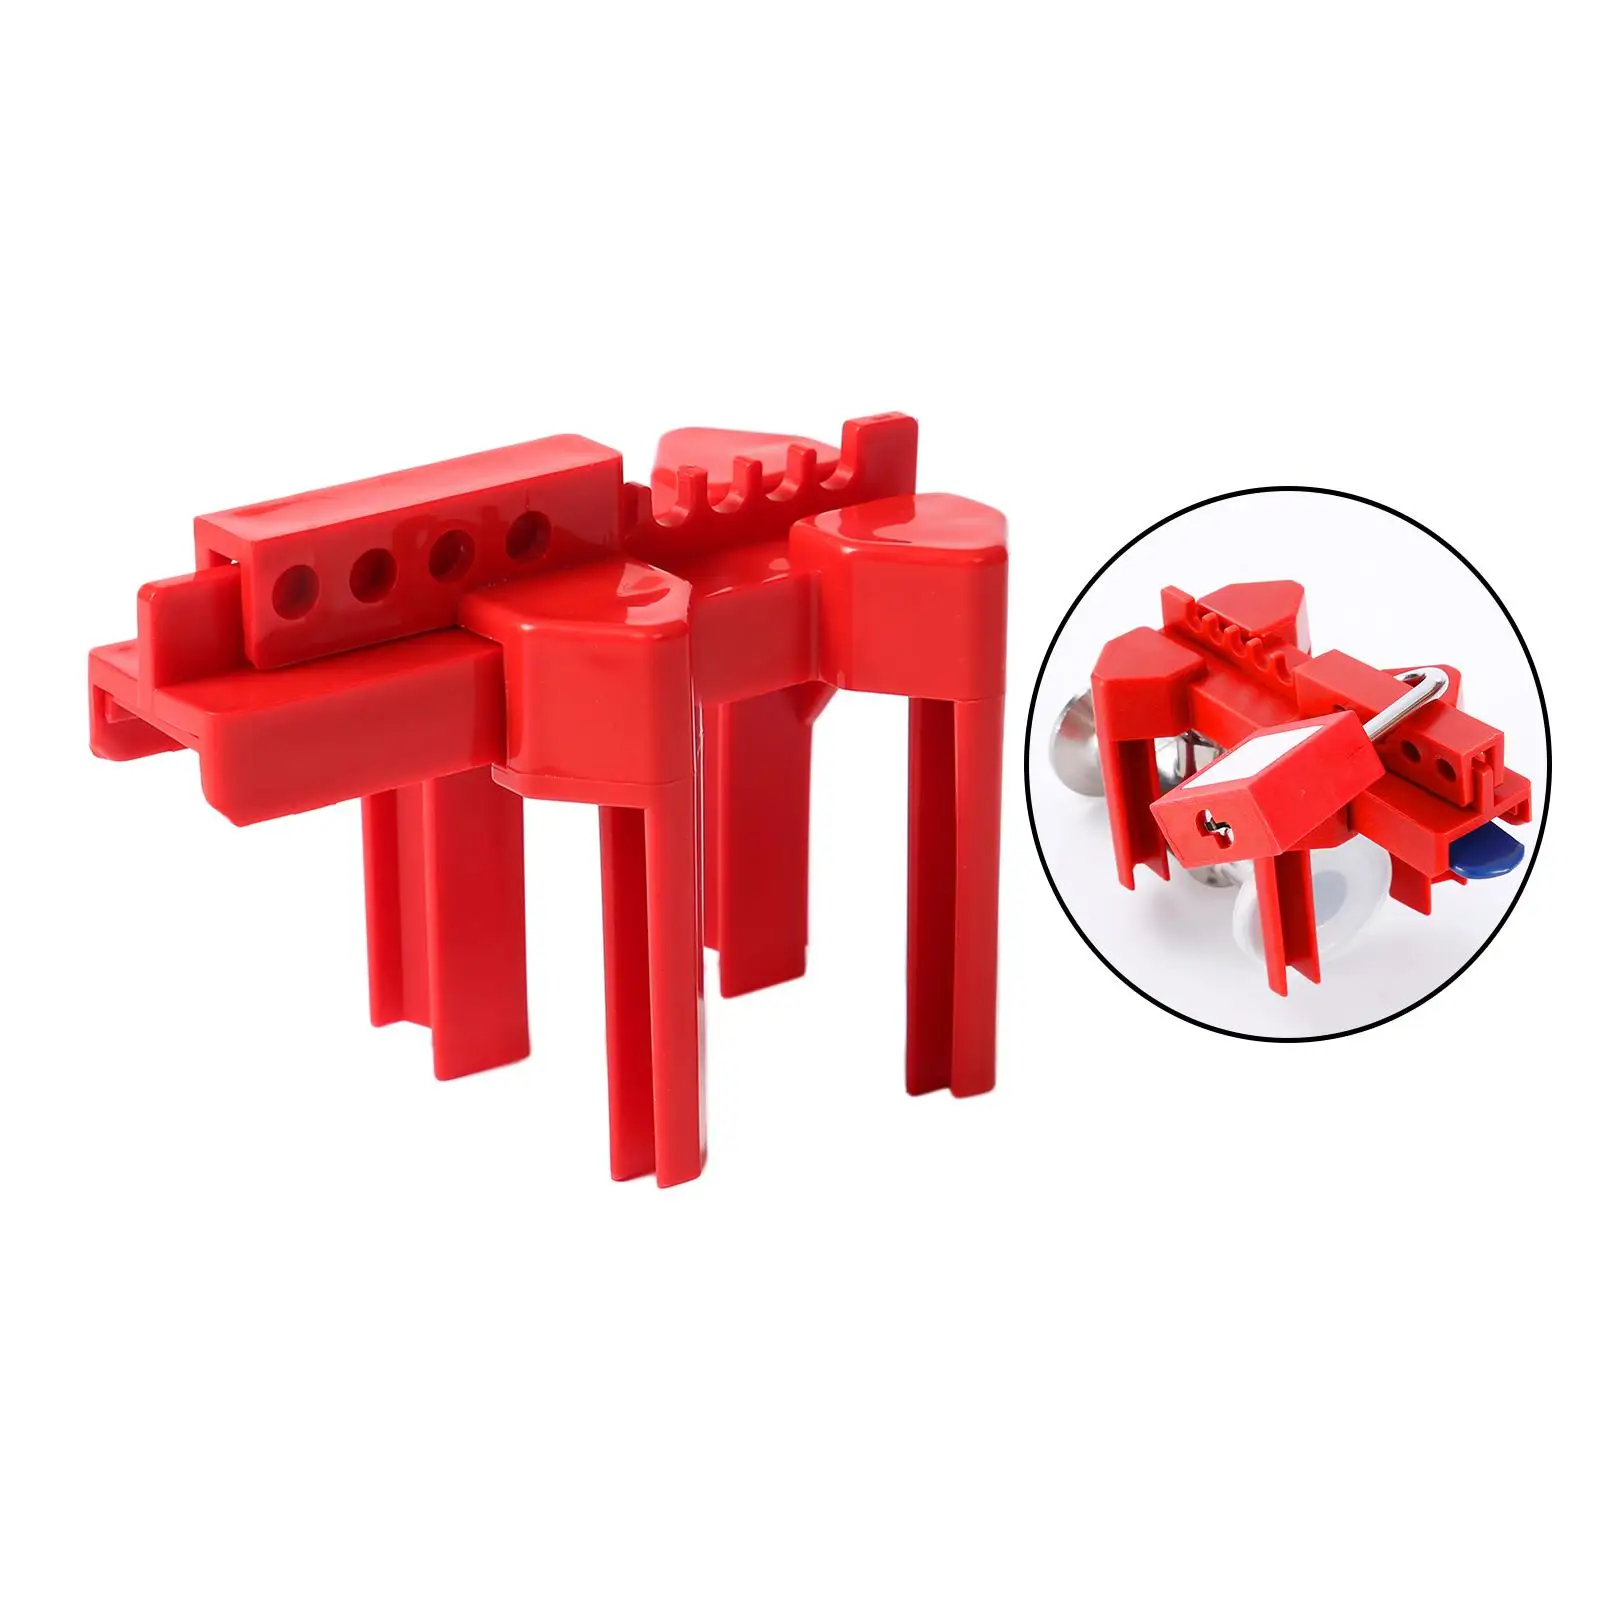 Ball Valve Lockout Device Durable Adjustable Outside Pipe Lock Red Practical Ball Valve Lock for Industrial Pipeline Valve